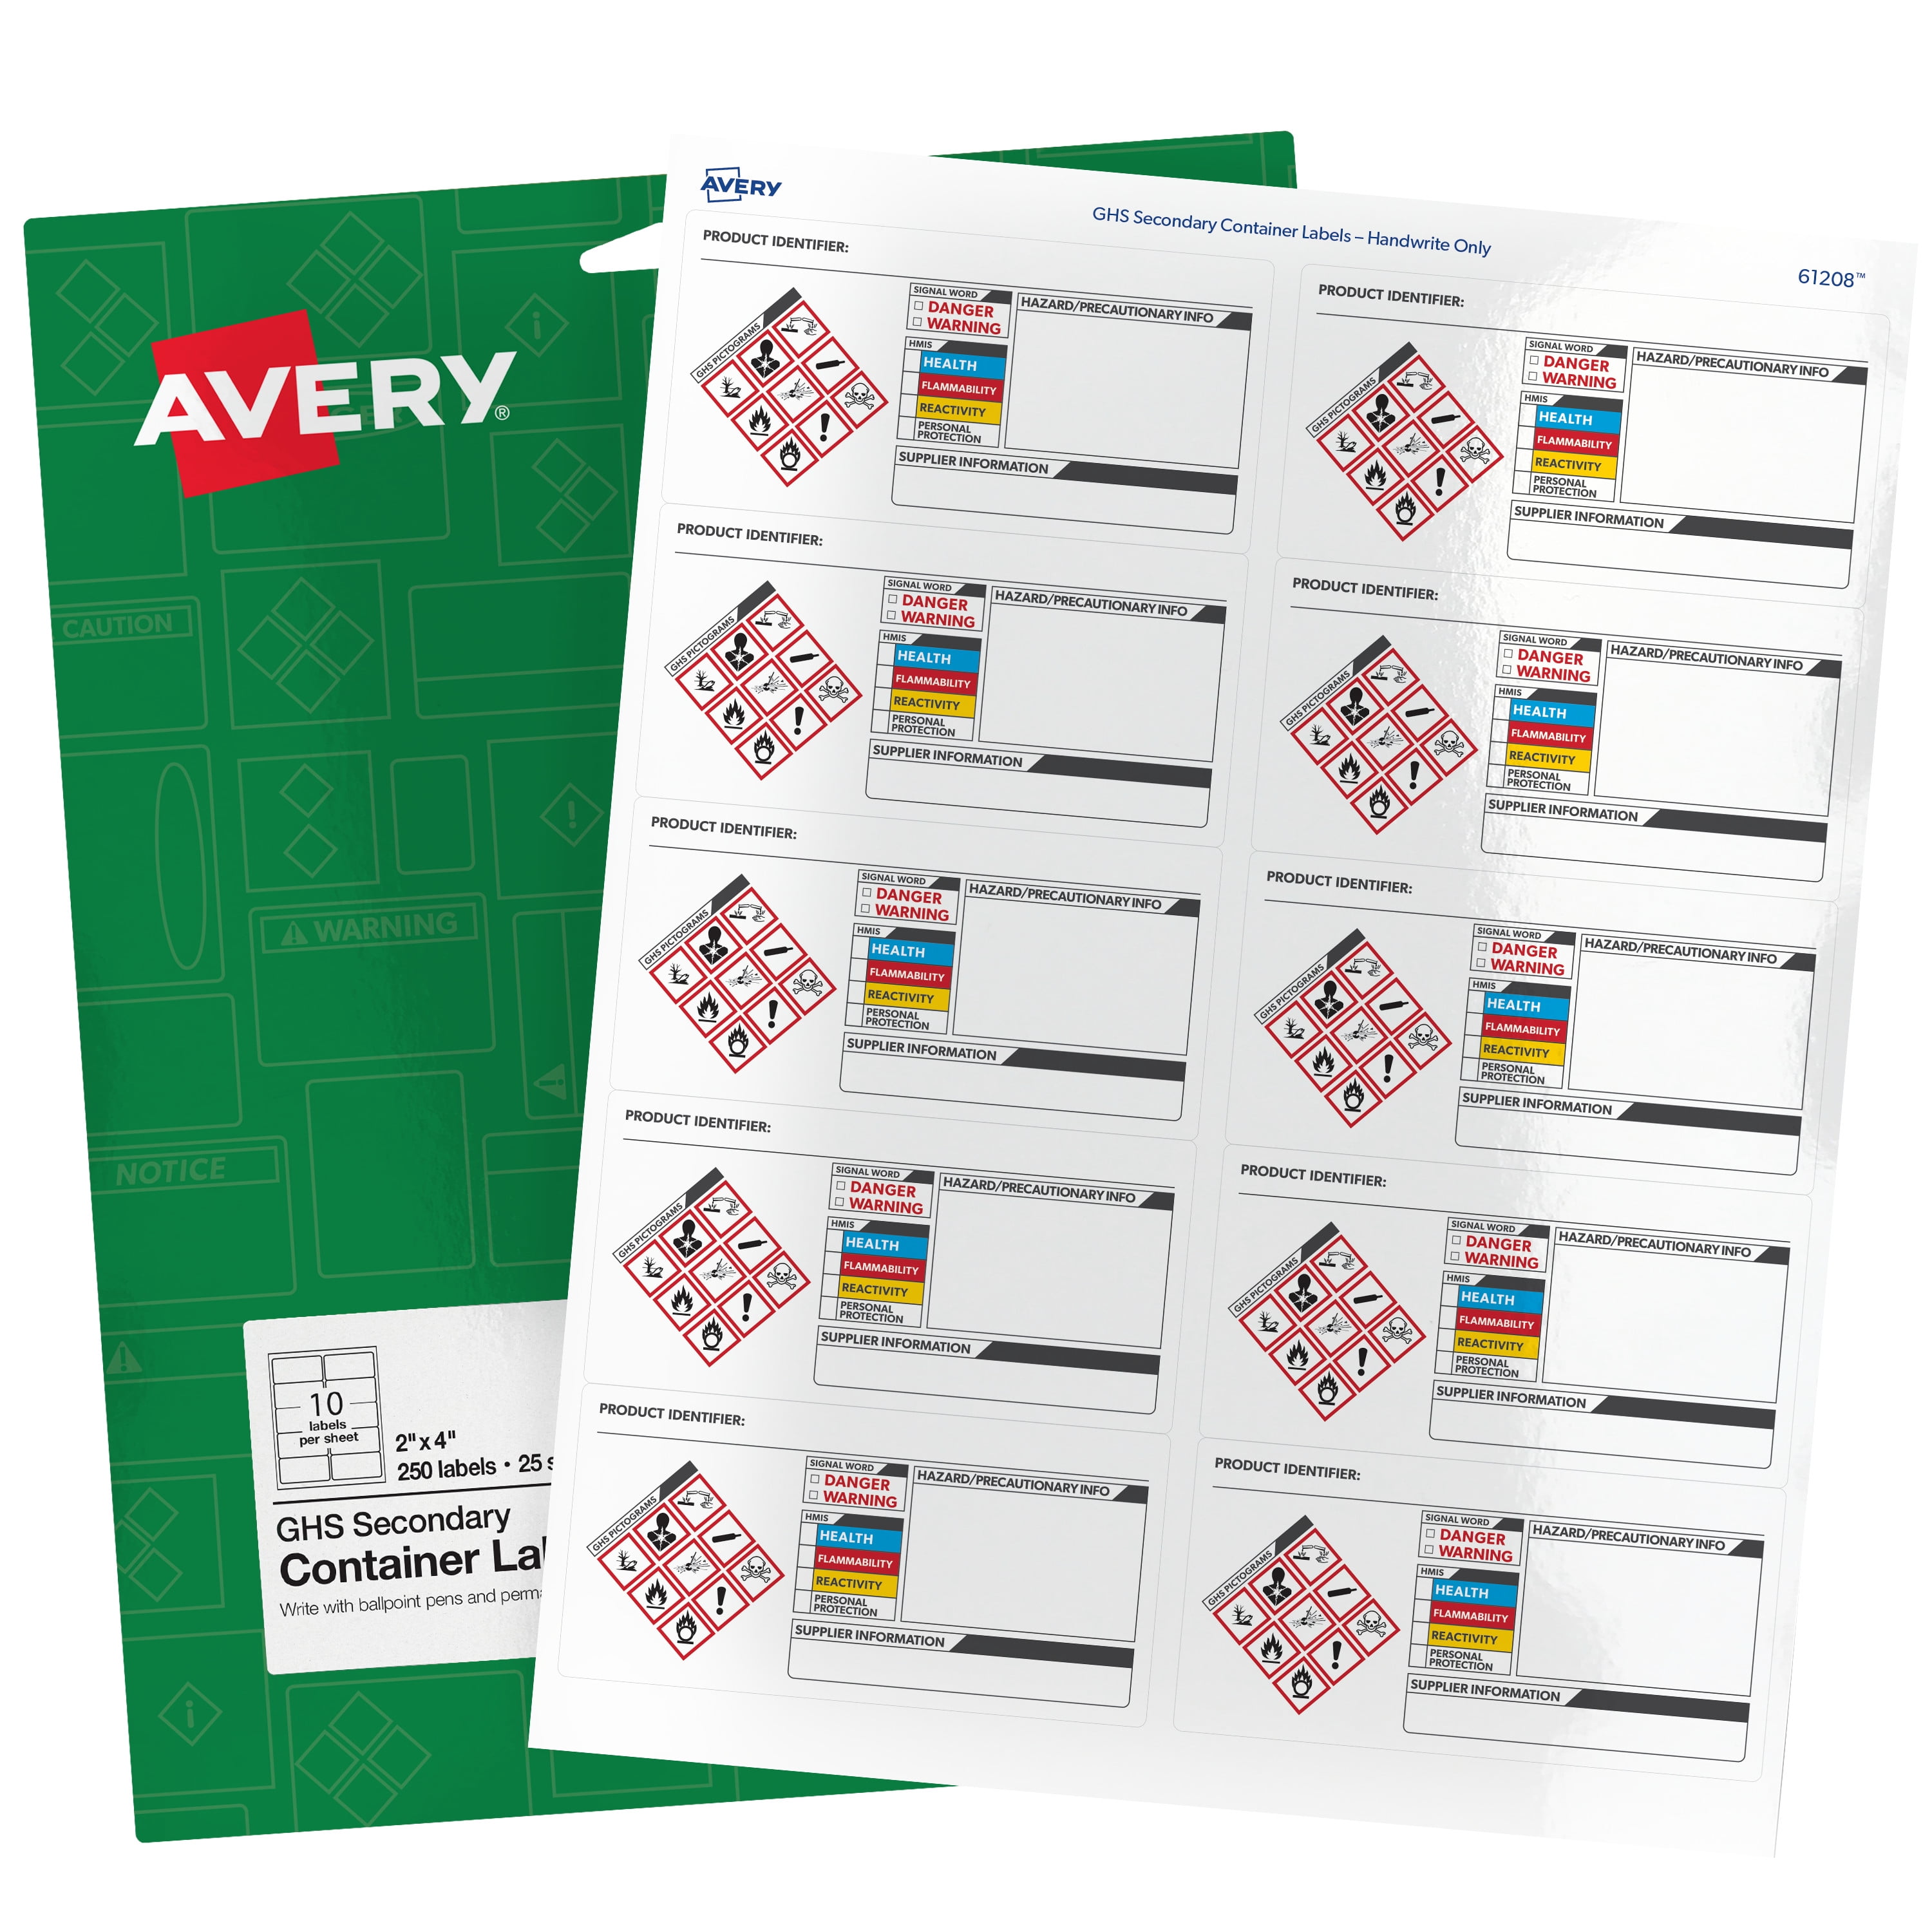 Avery GHS Secondary Container Labels, PrePrinted, Handwrite Only, 2" x